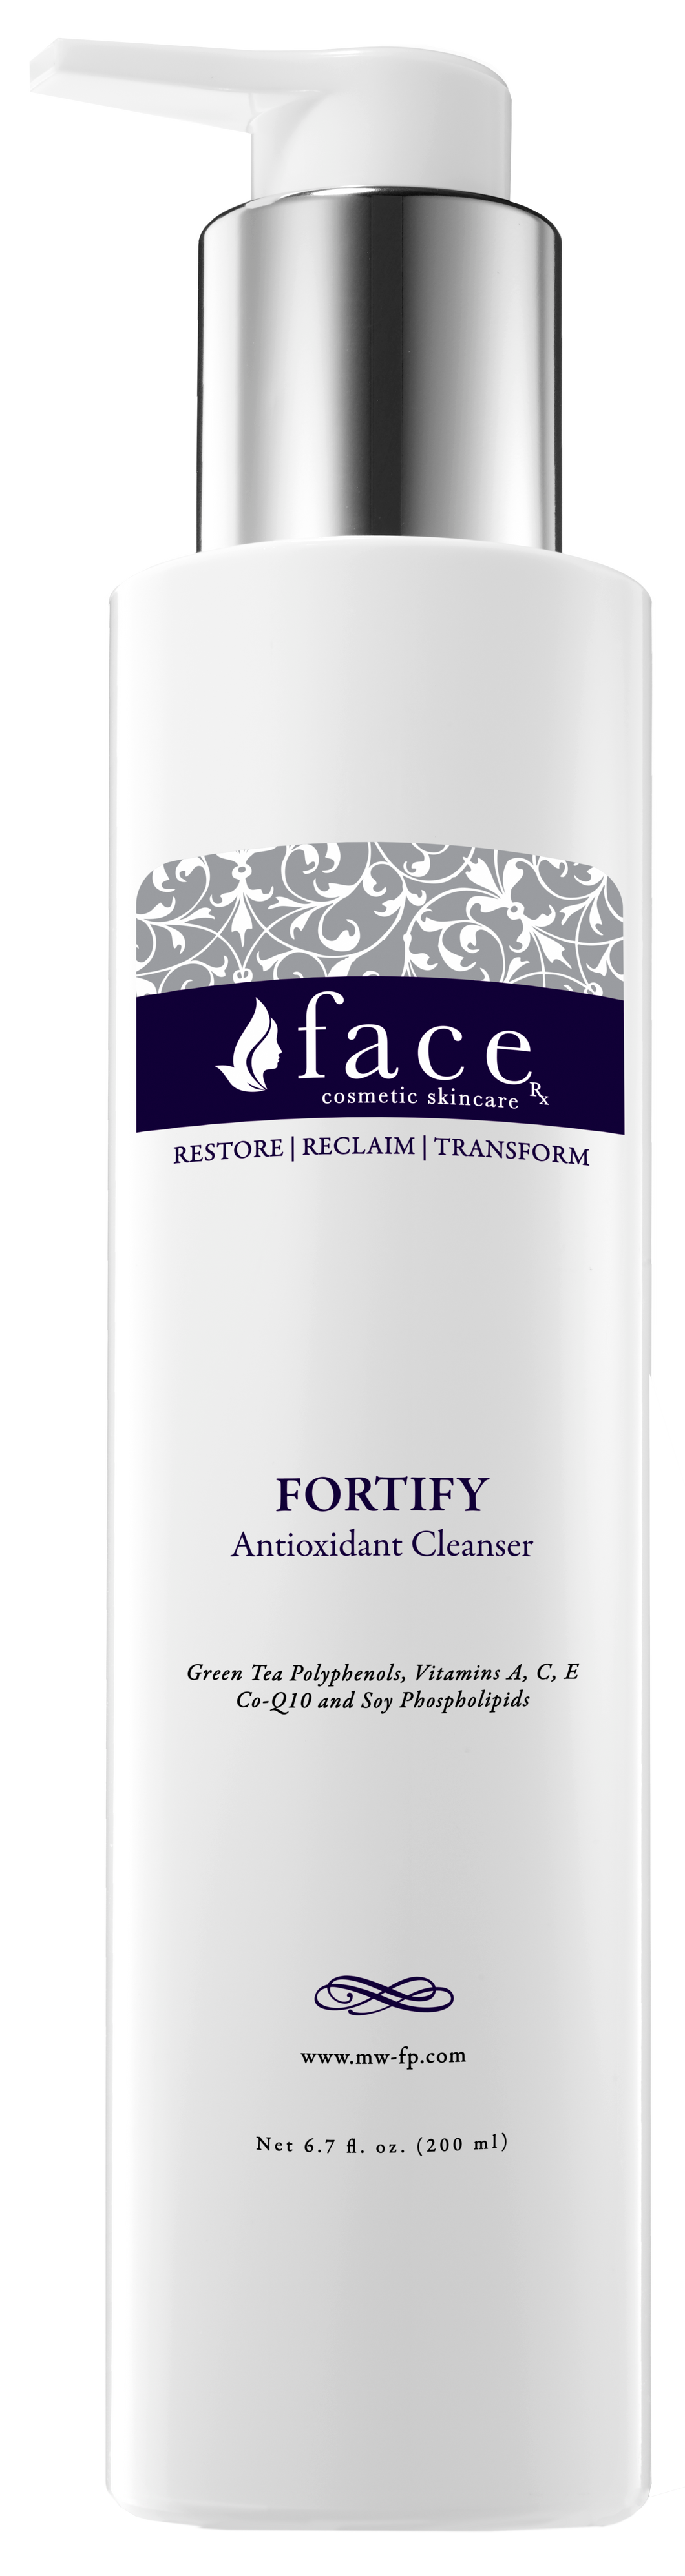 FORTIFY ANTIOXIDANT CLEANSER